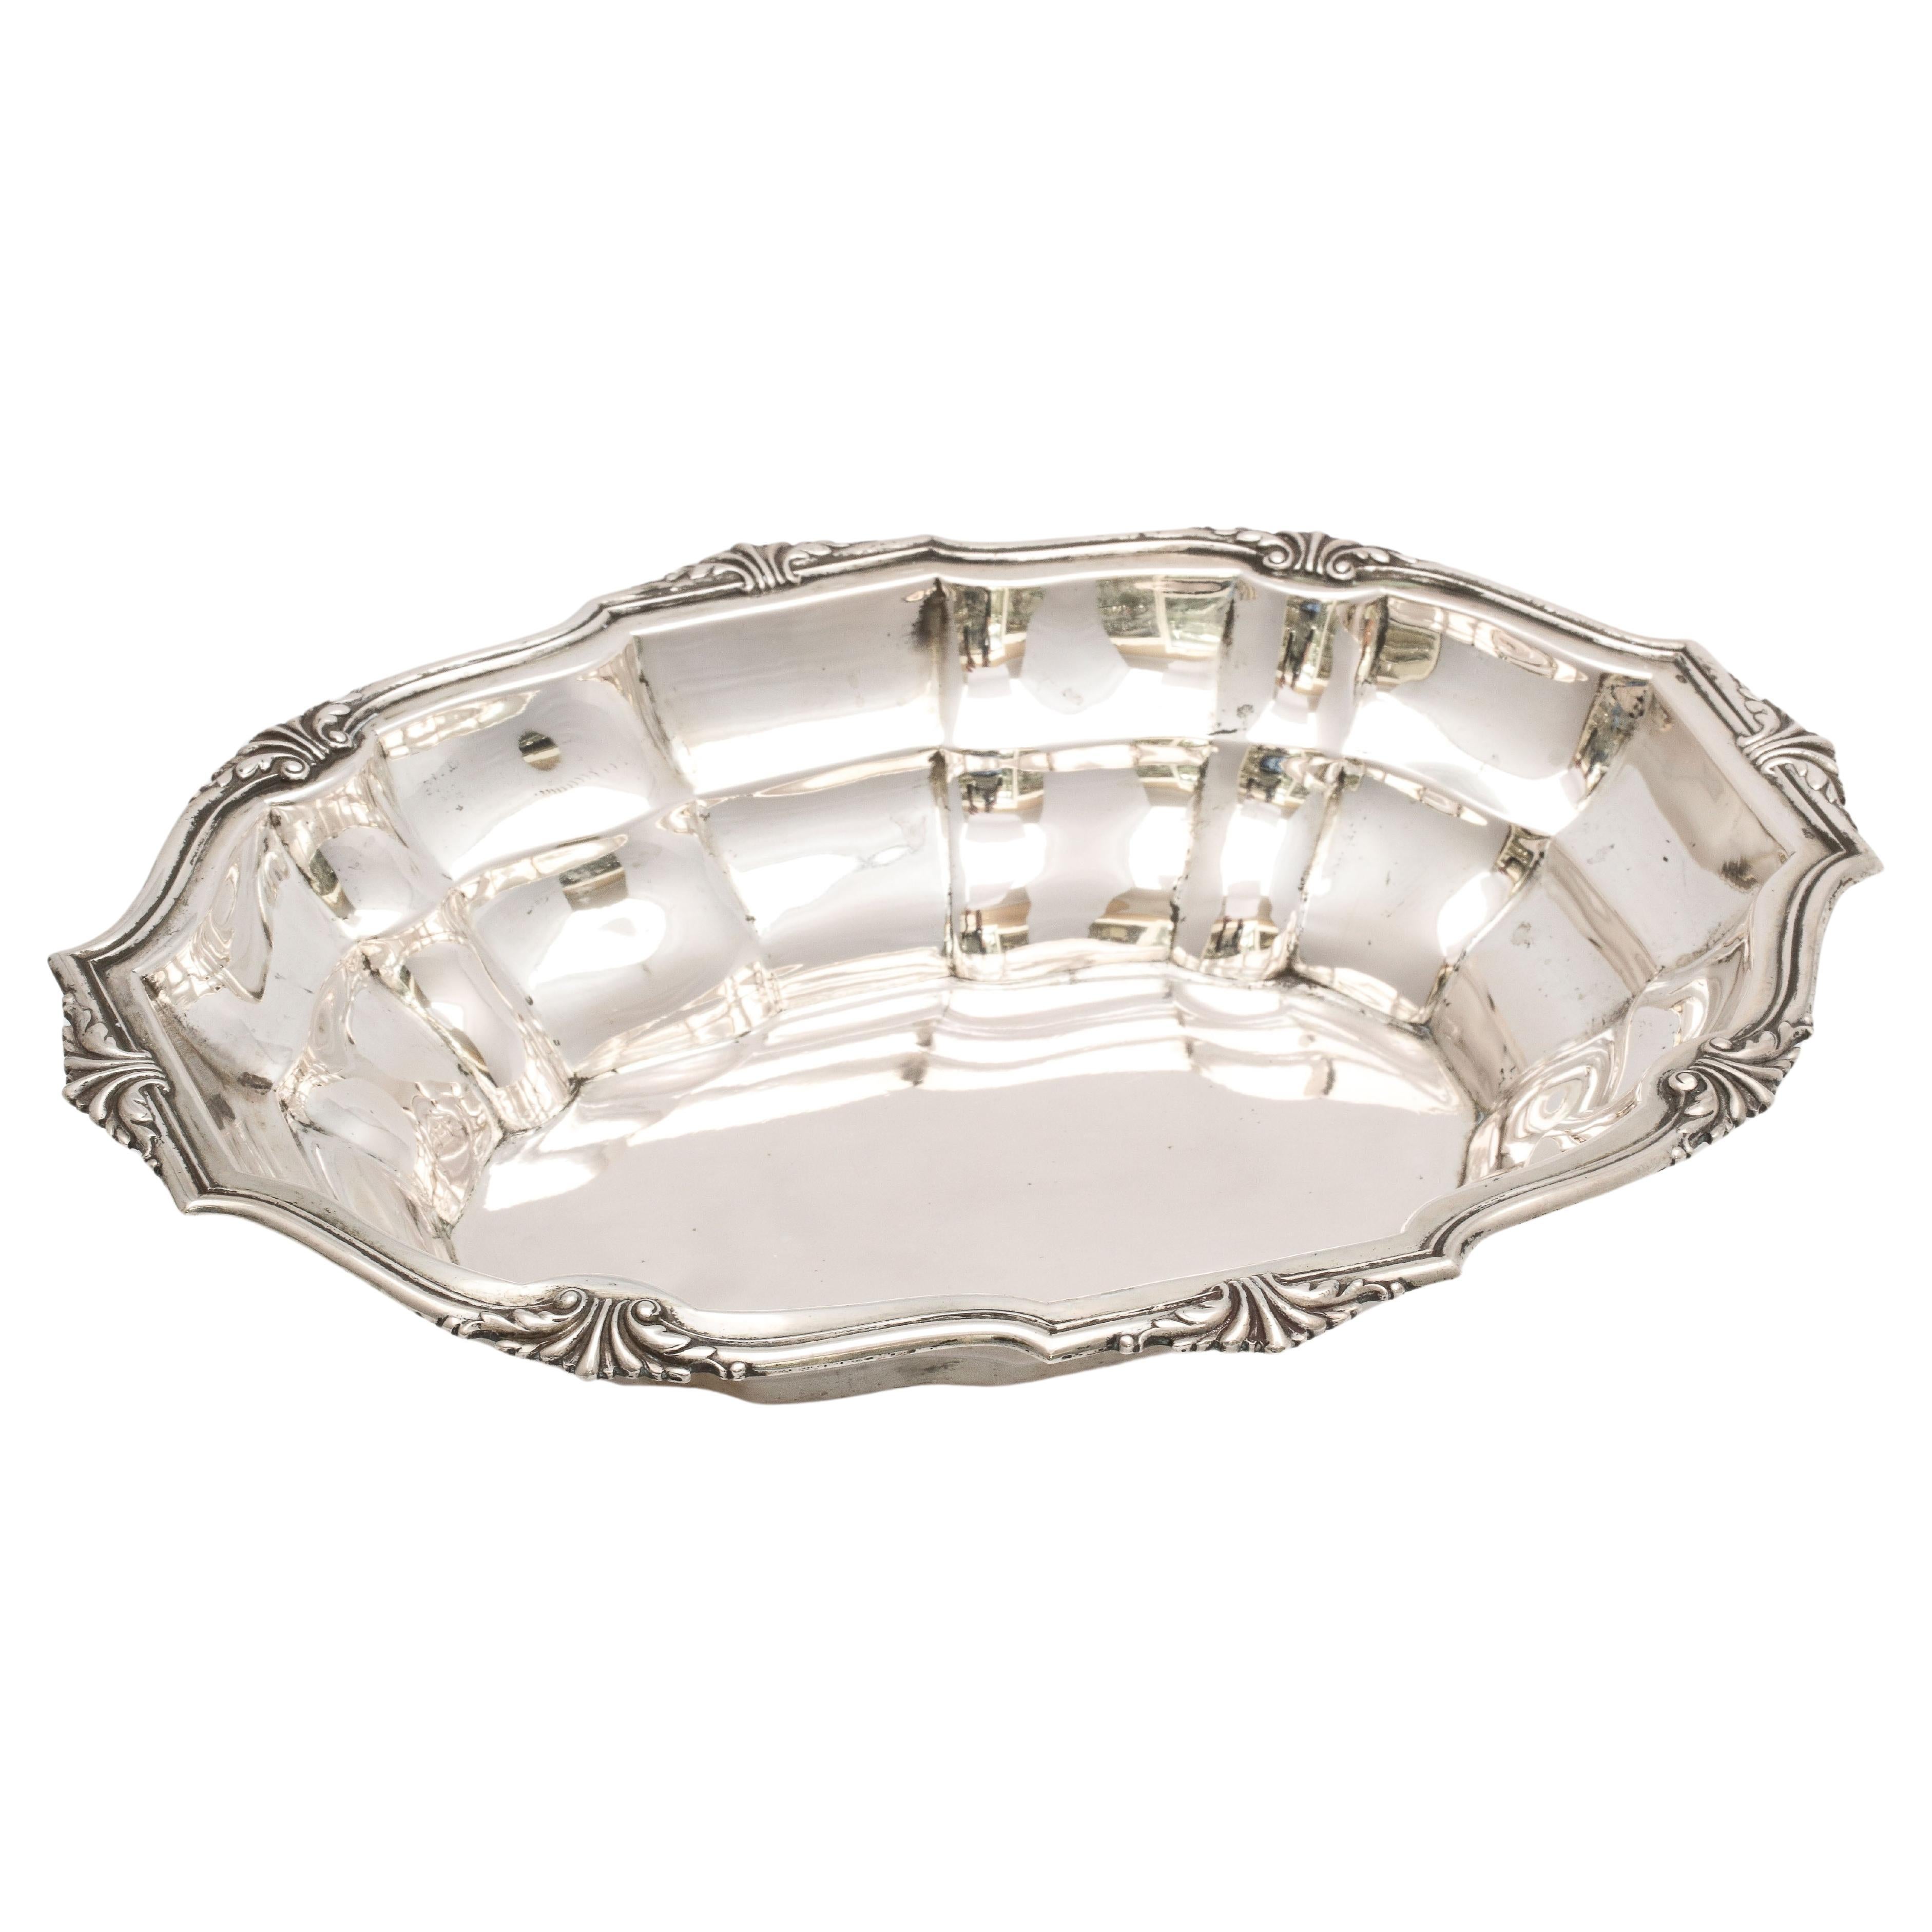 Edwardian Period Continental Silver (.800) Serving Bowl